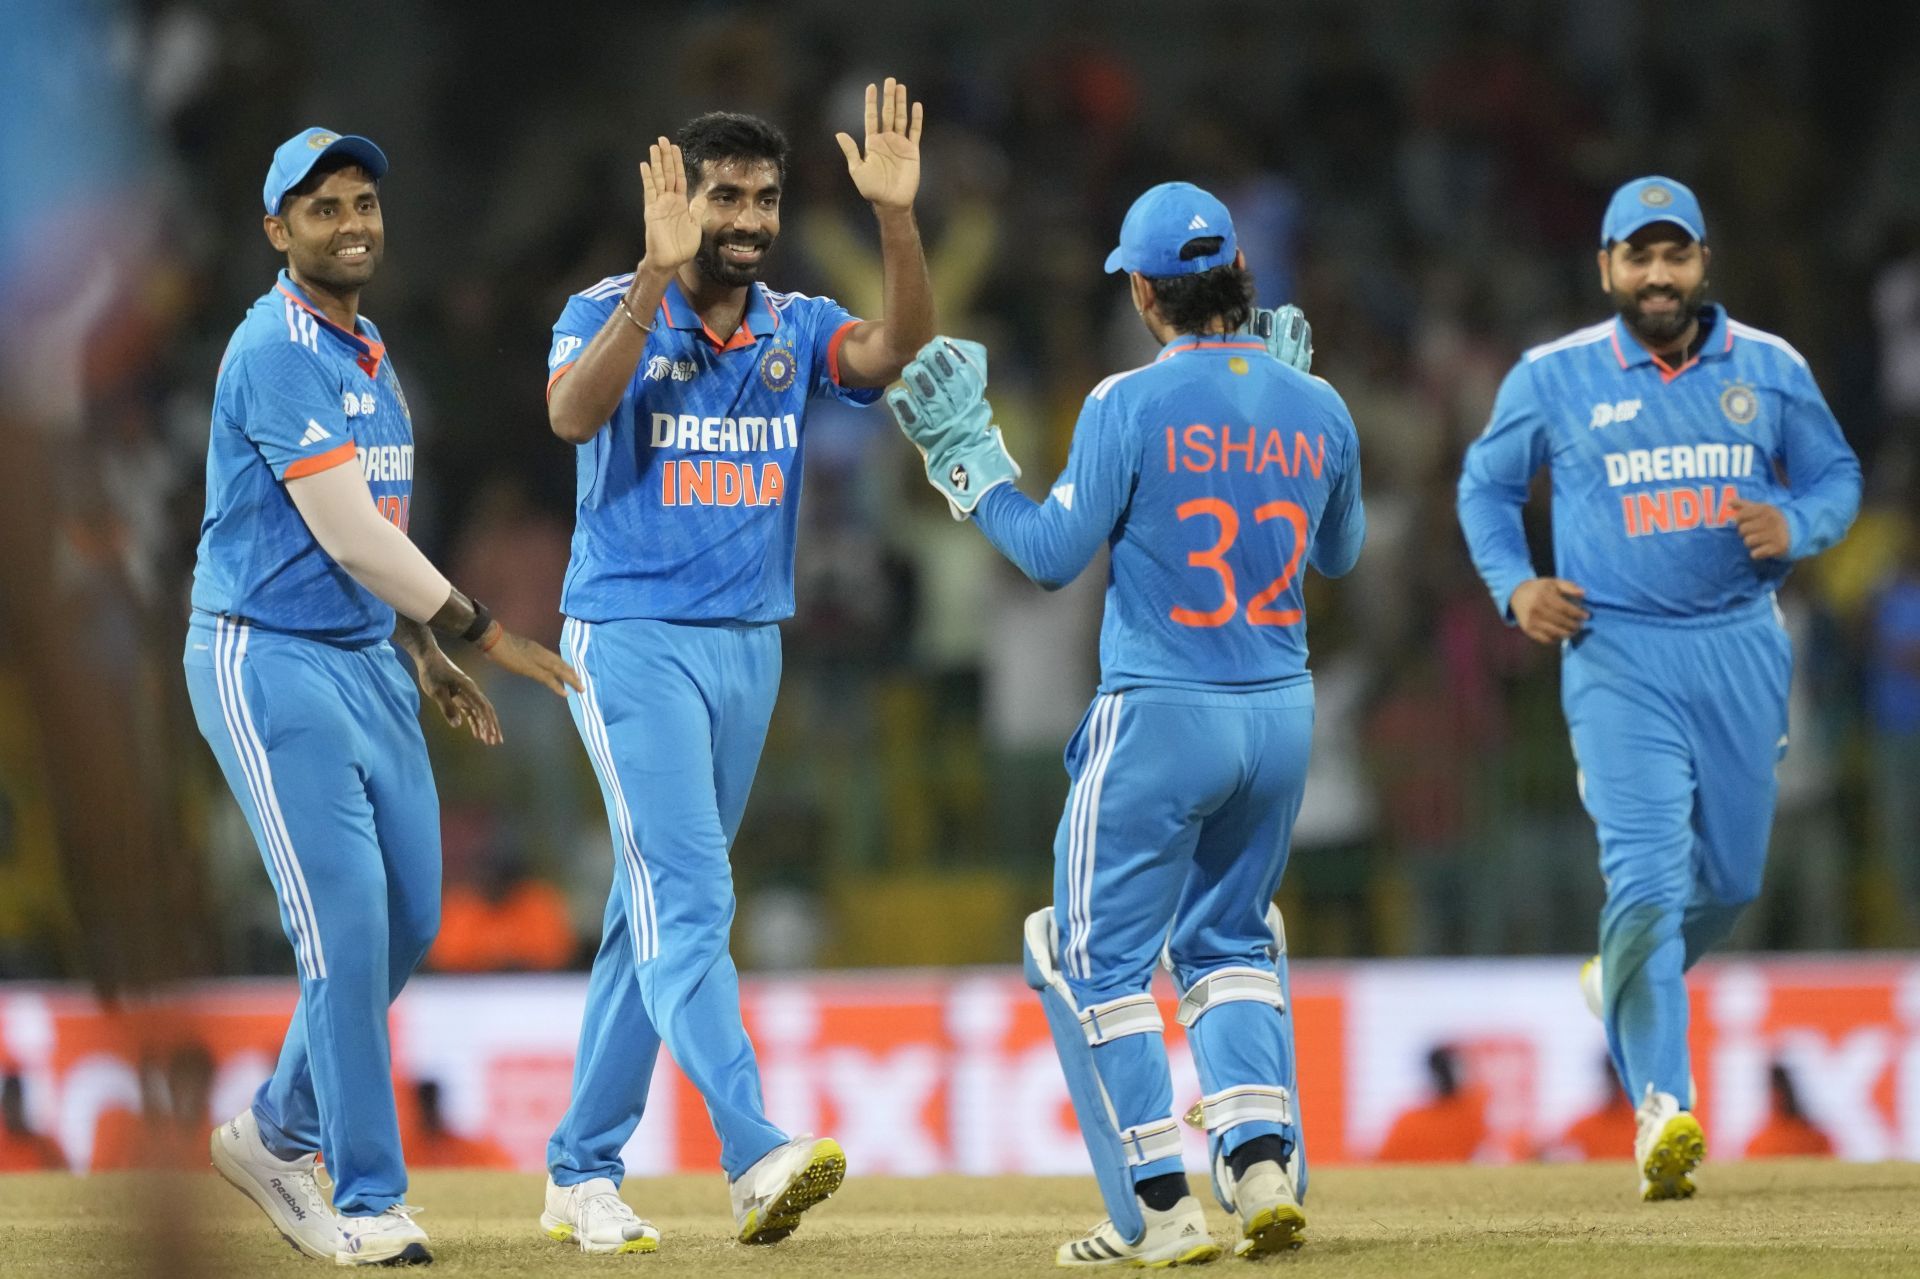 Jasprit Bumrah, who returned to join the Indian team after missing the previous game for the birth of his child, got the early breakthrough for India. He had Imam-ul-Haq caught at slip for 9. (Pic: AP Photo/Eranga Jayawardena)